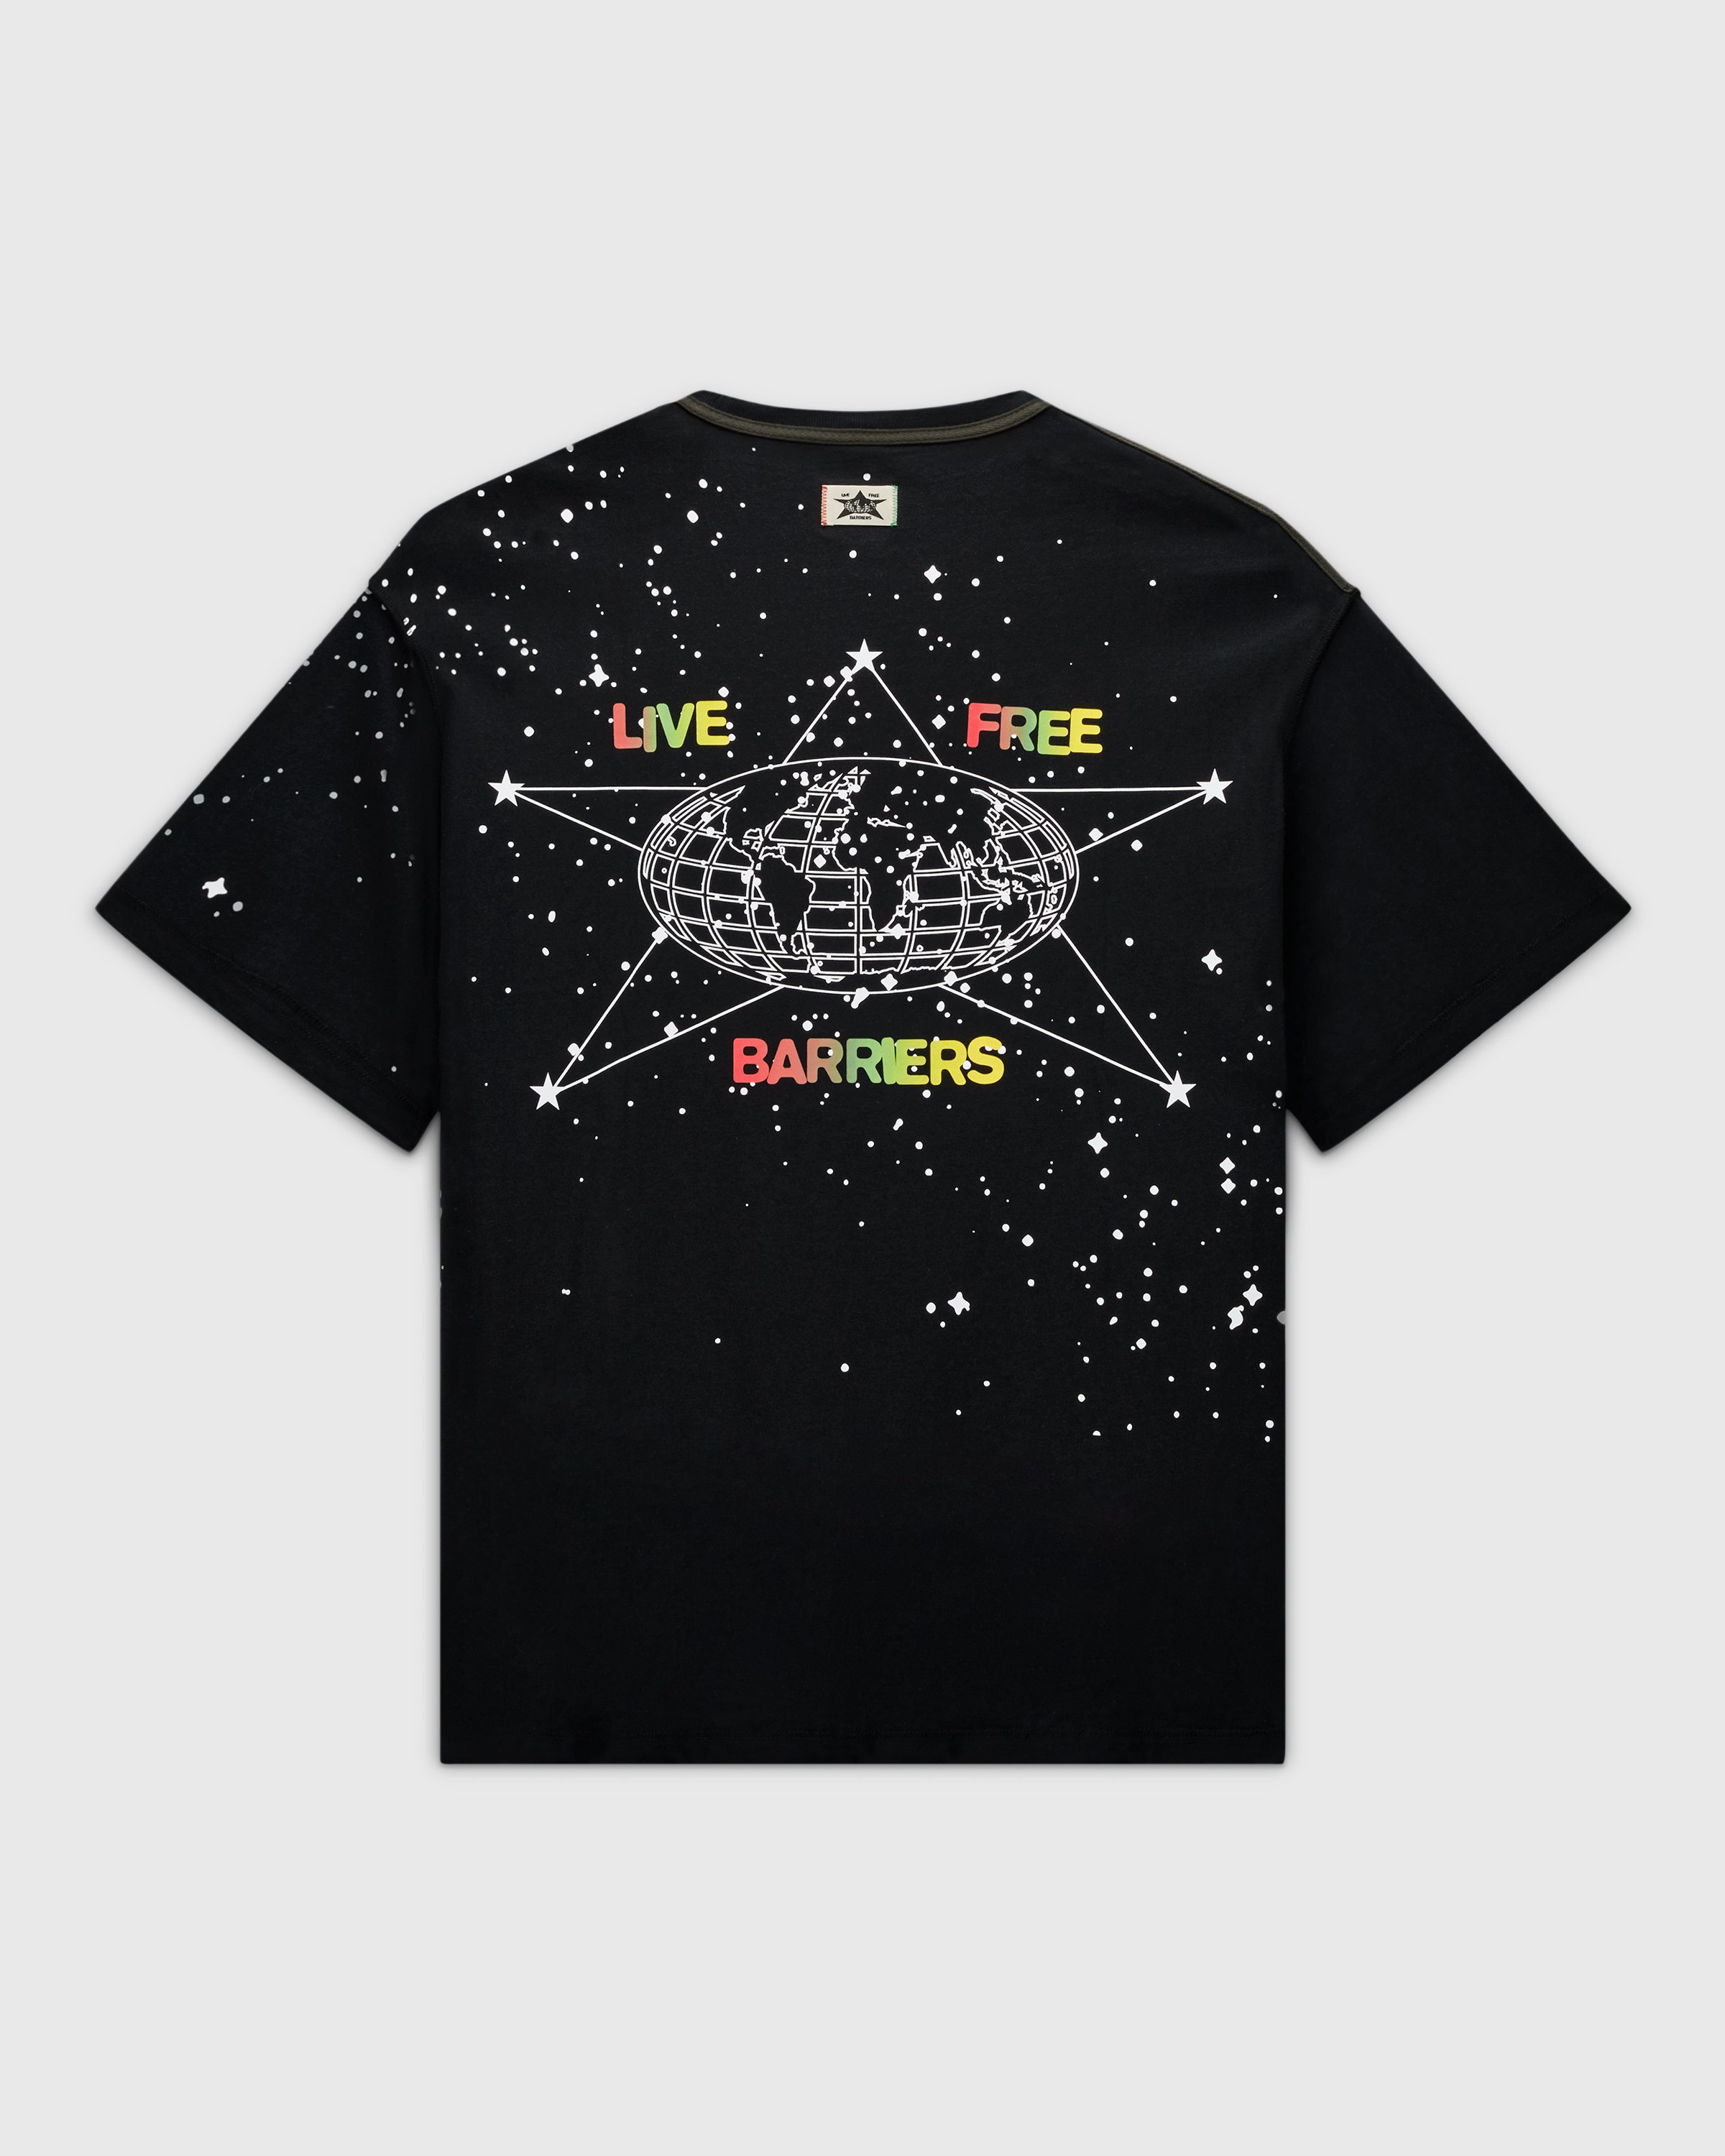 Converse x Barriers - Court Ready Crossover Tee Black - Clothing - Black - Image 1